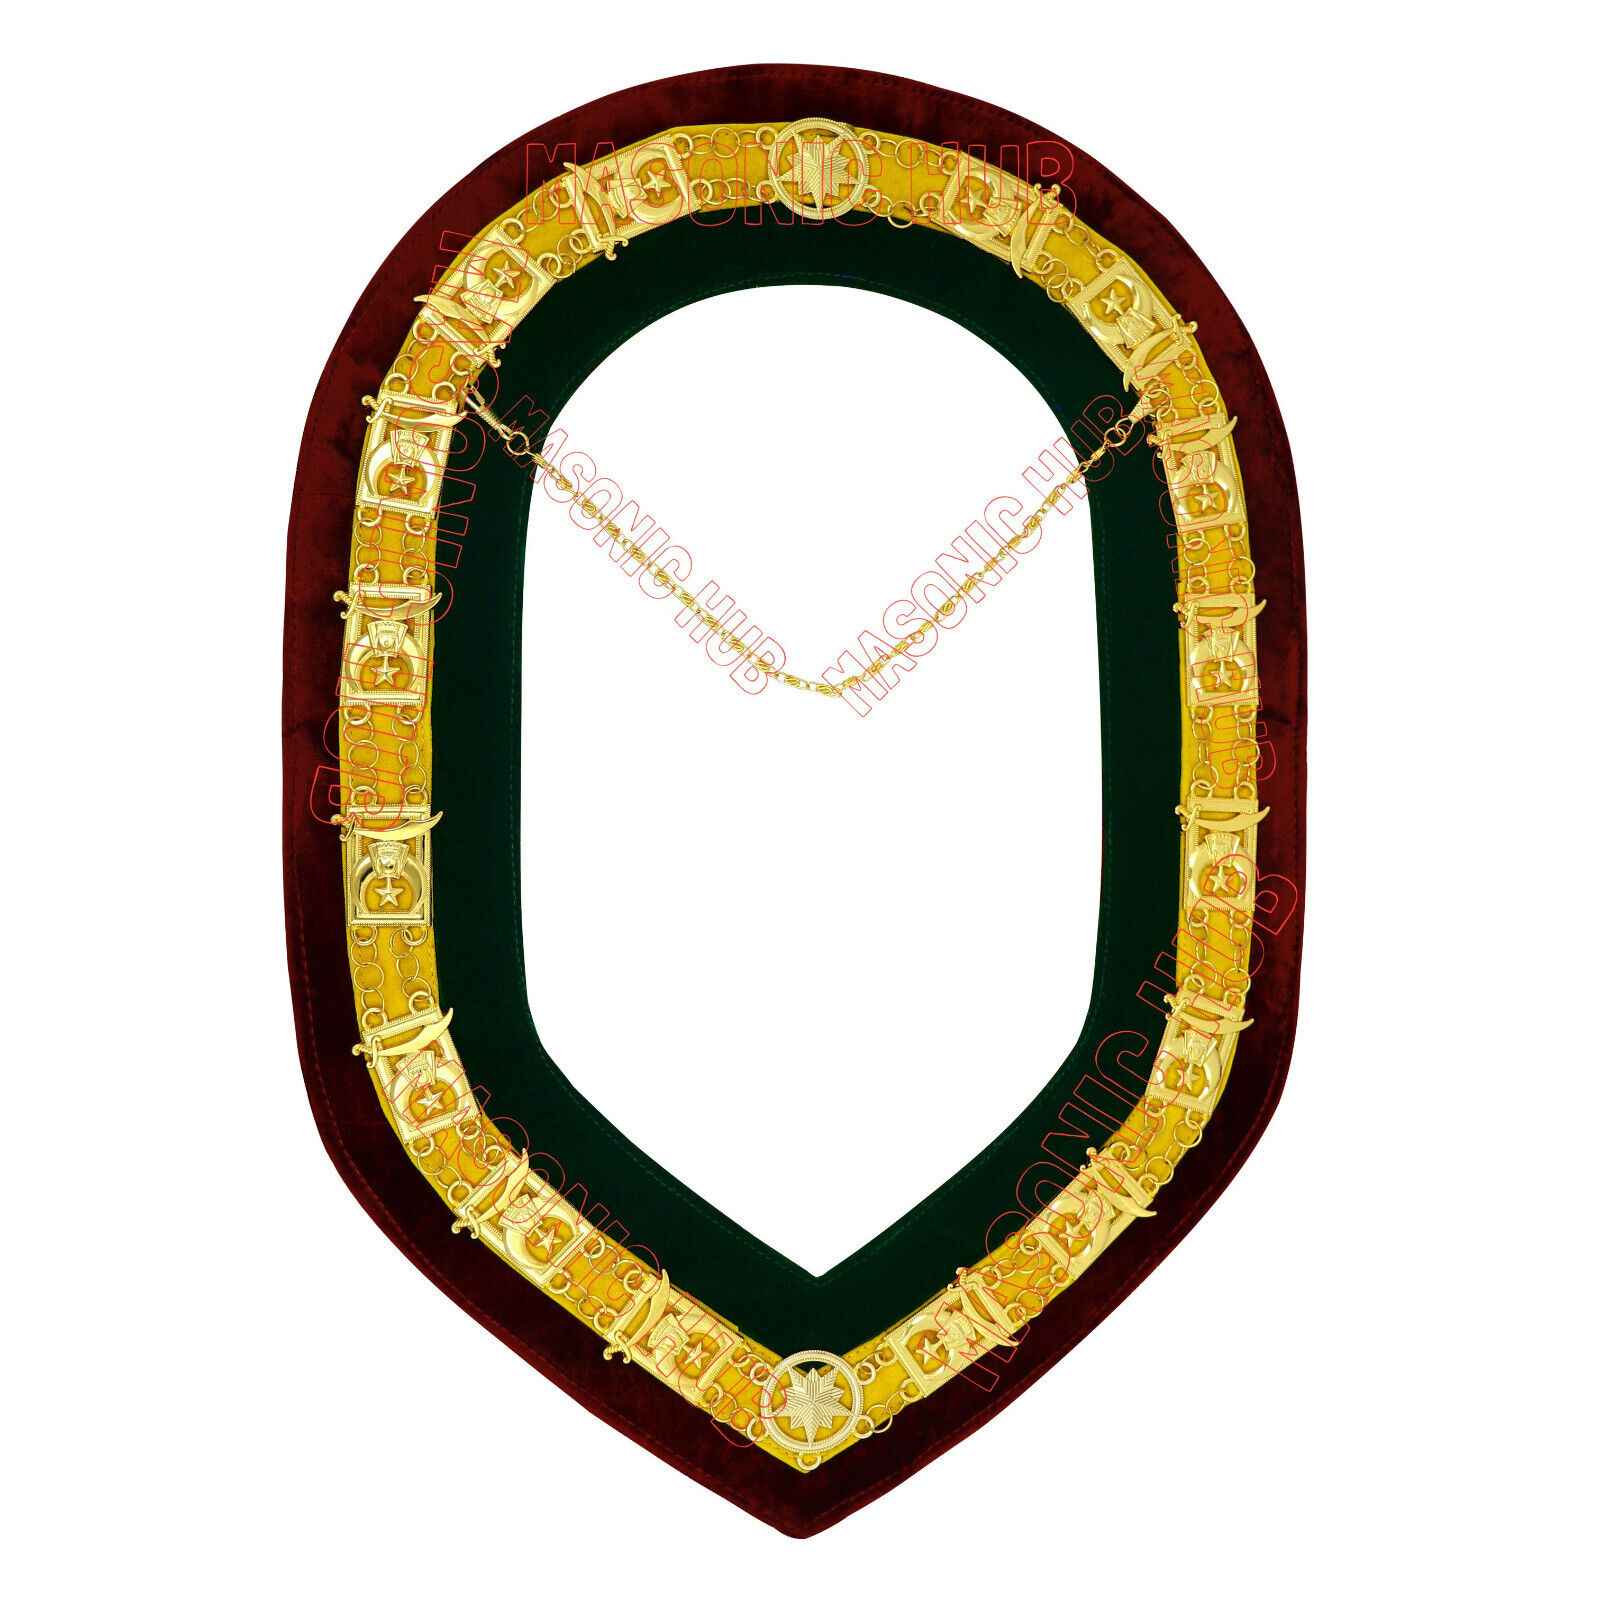 Regalia Masonic Shriner Tri-Color Deluxe Chain Collar in Red, Green, and Yellow